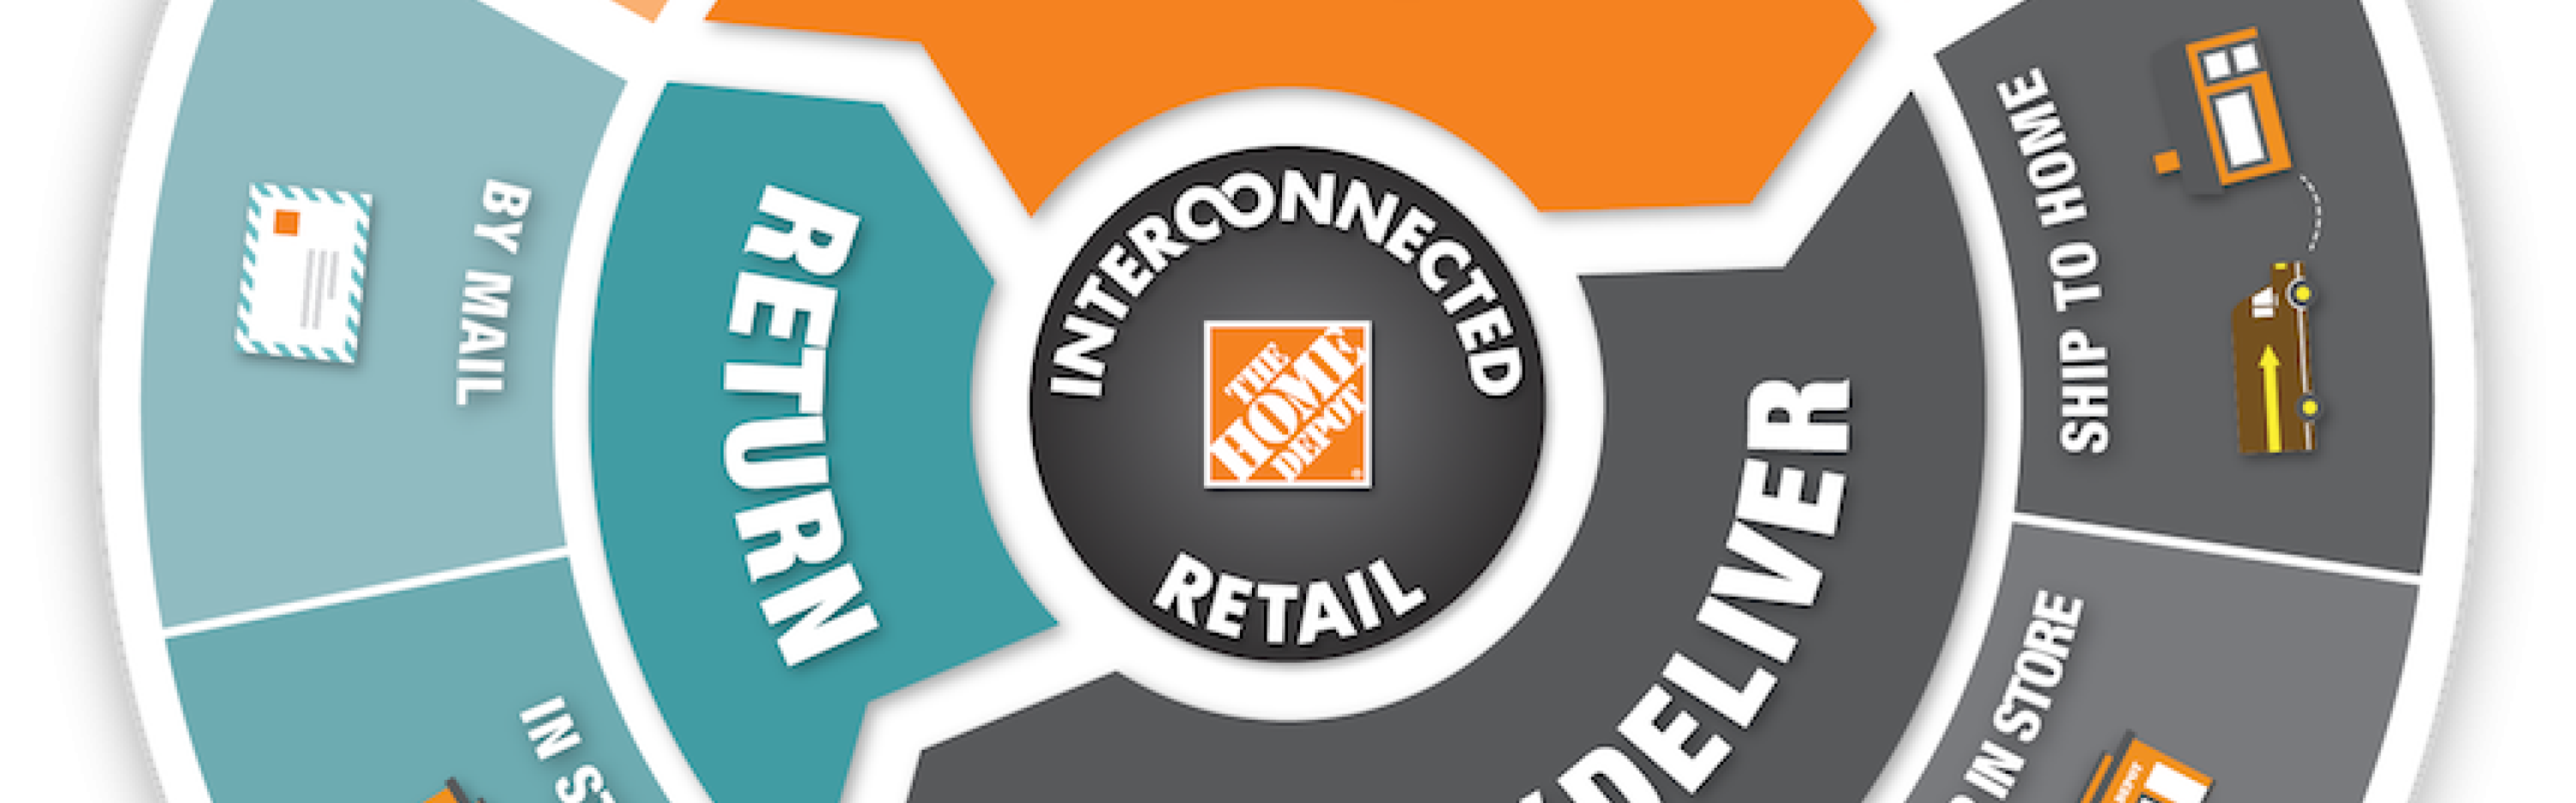 SEAMLESS SHOPPING: INSIDE HOME DEPOT’S INTERCONNECTED RETAIL REVOLUTION 